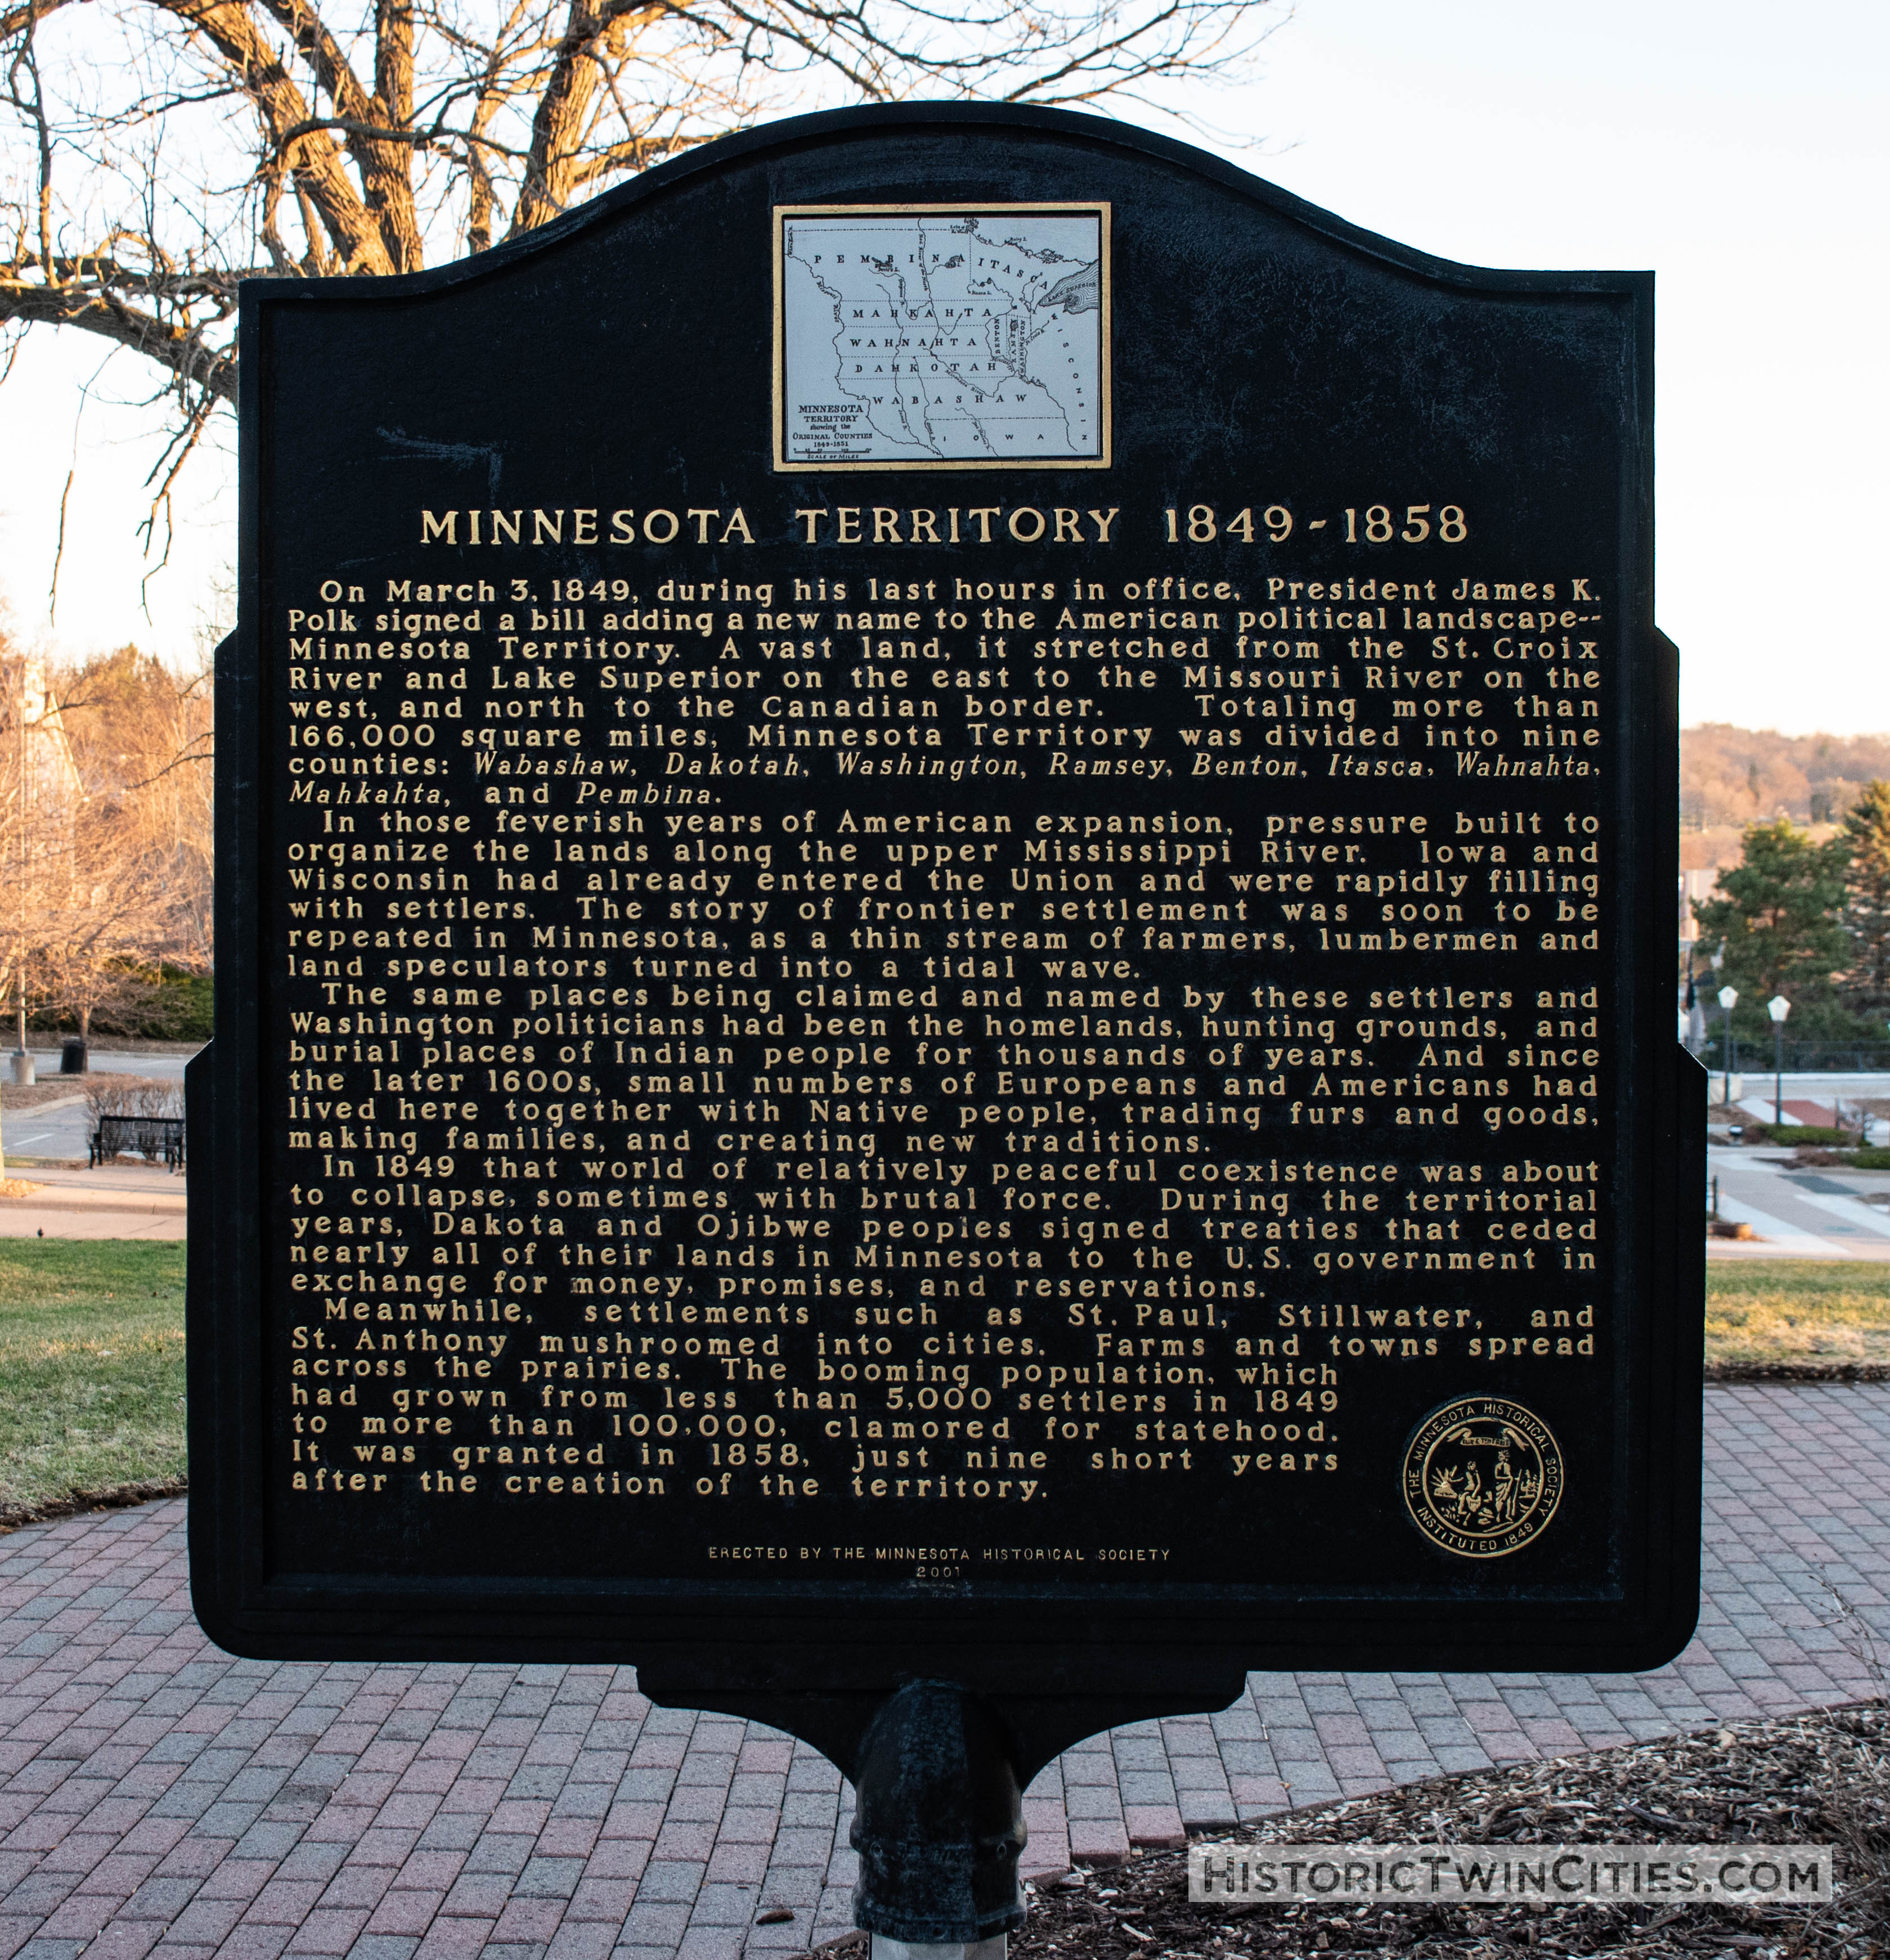 Historic marker on the grounds of the Historic Washington County Courthouse - Stillwater, MN